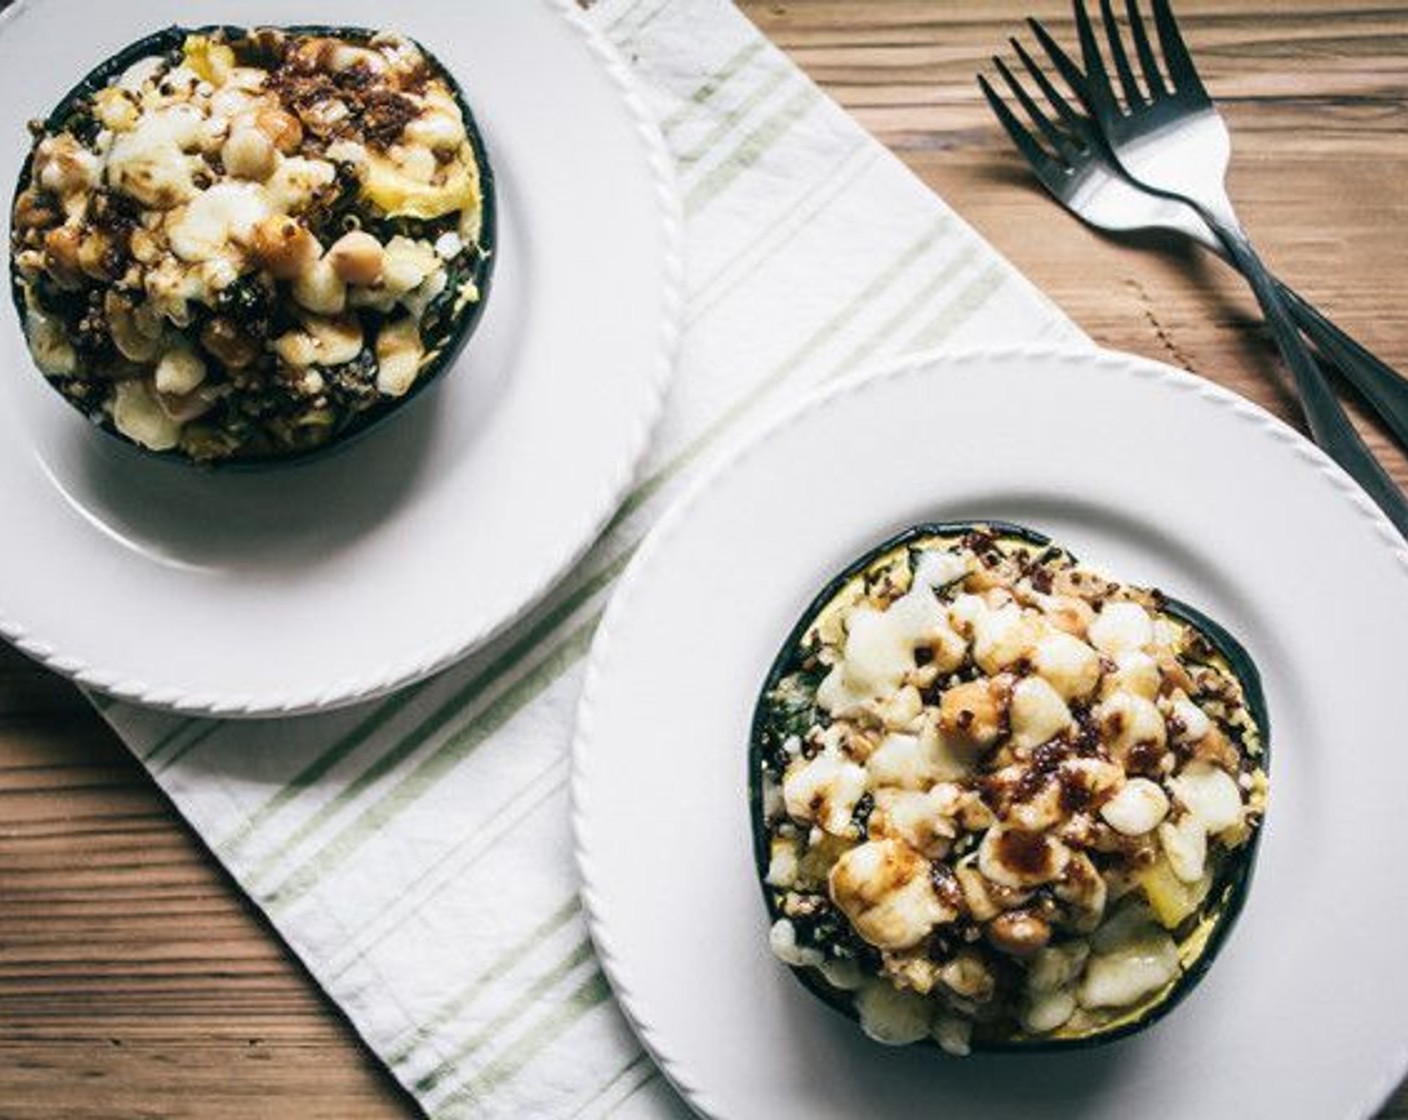 Stuffed Acorn Squash with Quinoa and Aged Cheddar